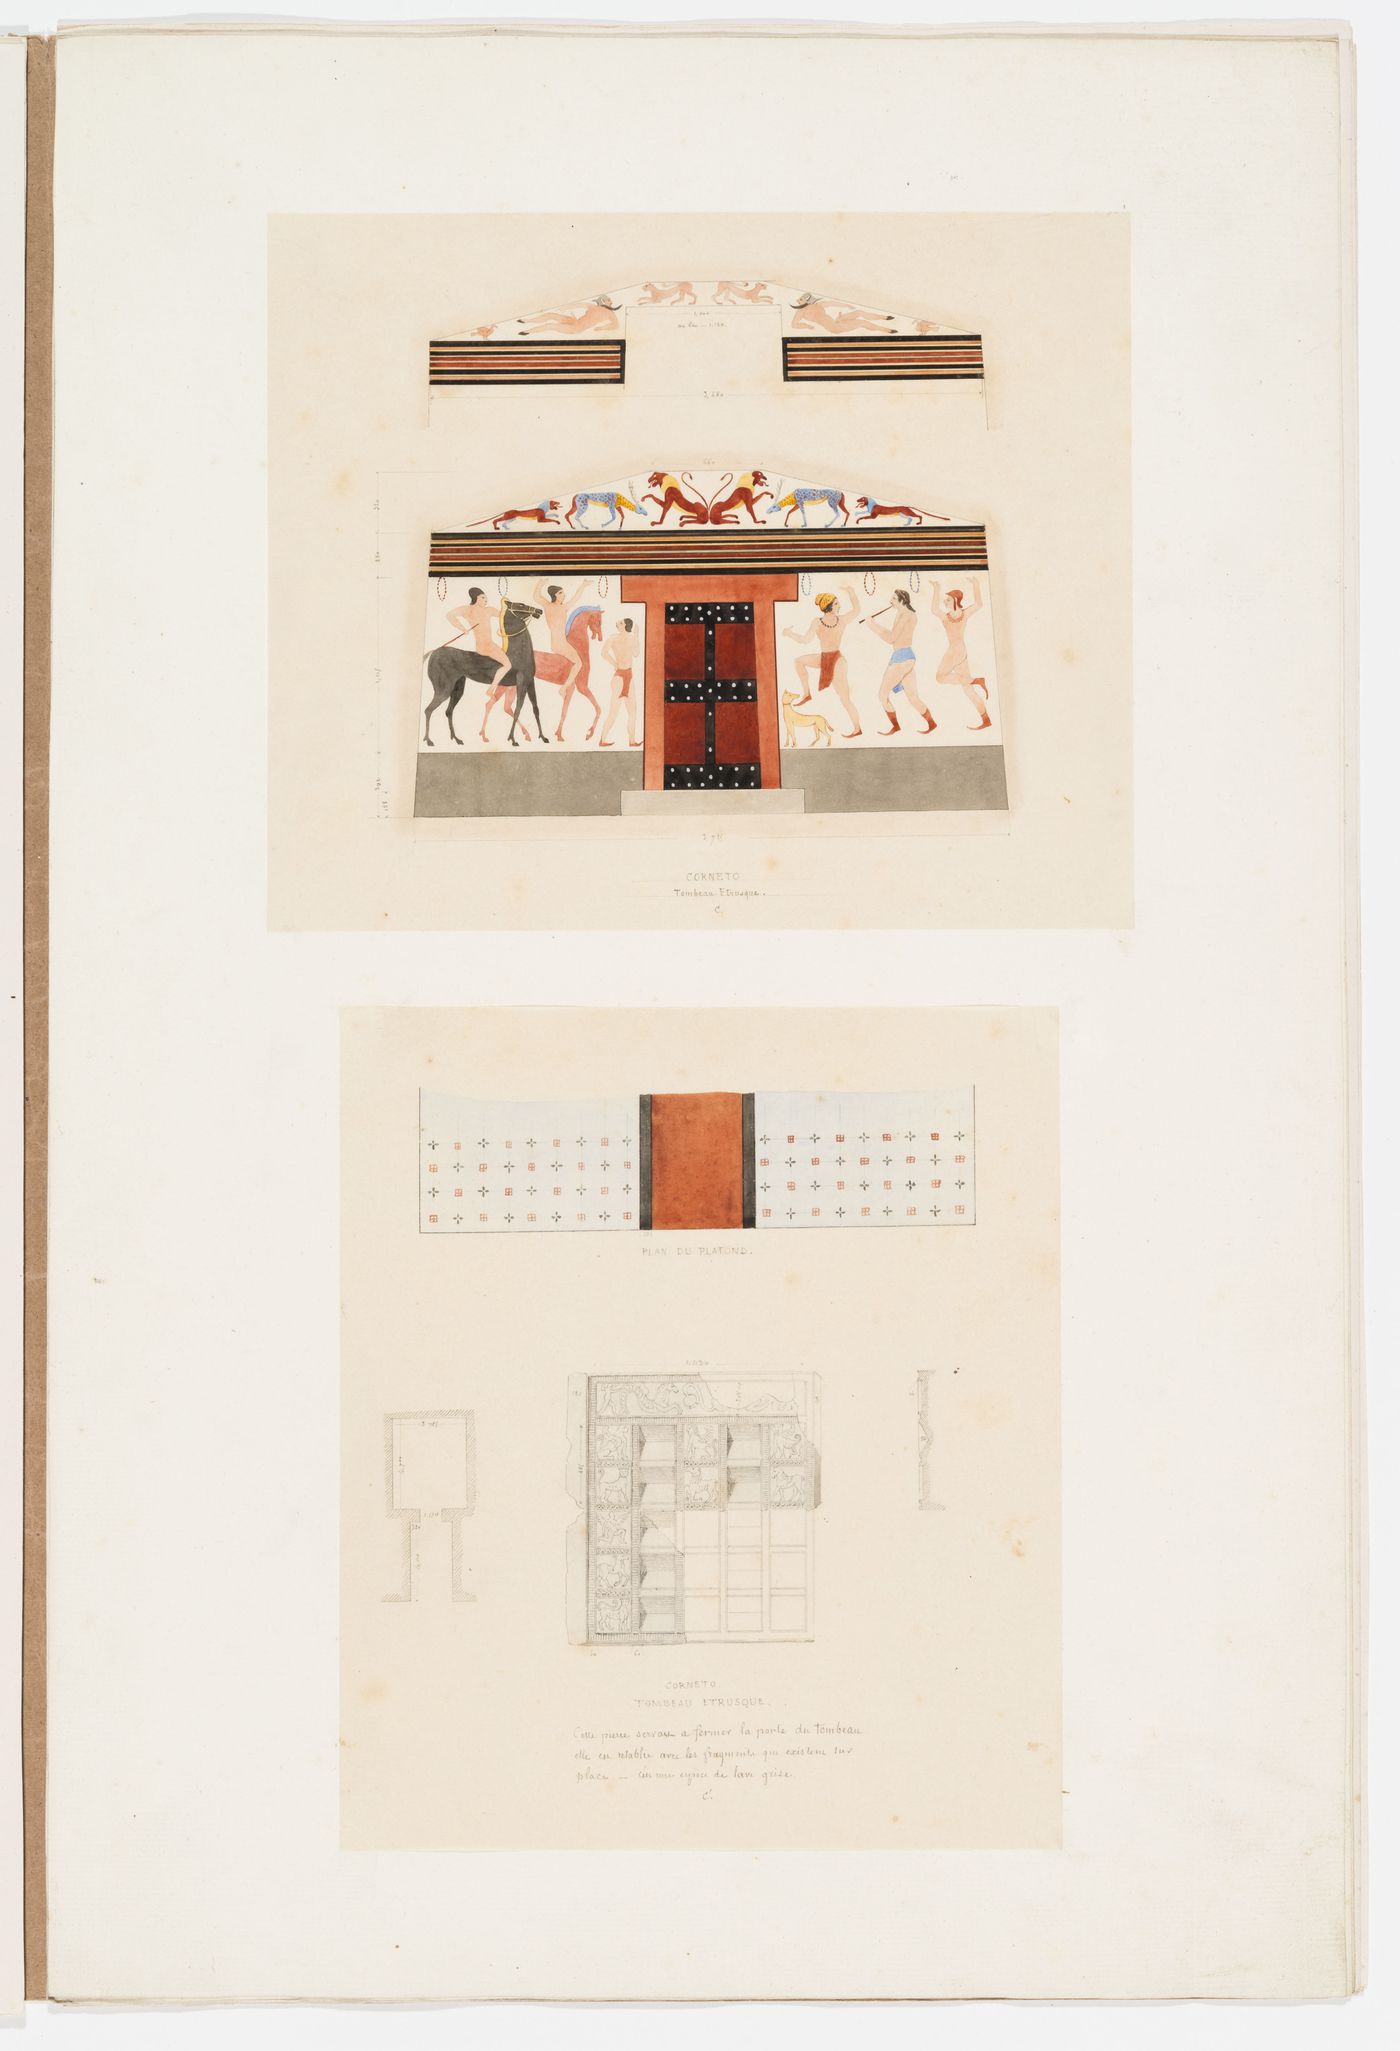 Two drawings of the Etruscan tomb, Tarquina: Interior elevations, floor plan, reflected ceiling plan, detail and profile of the door